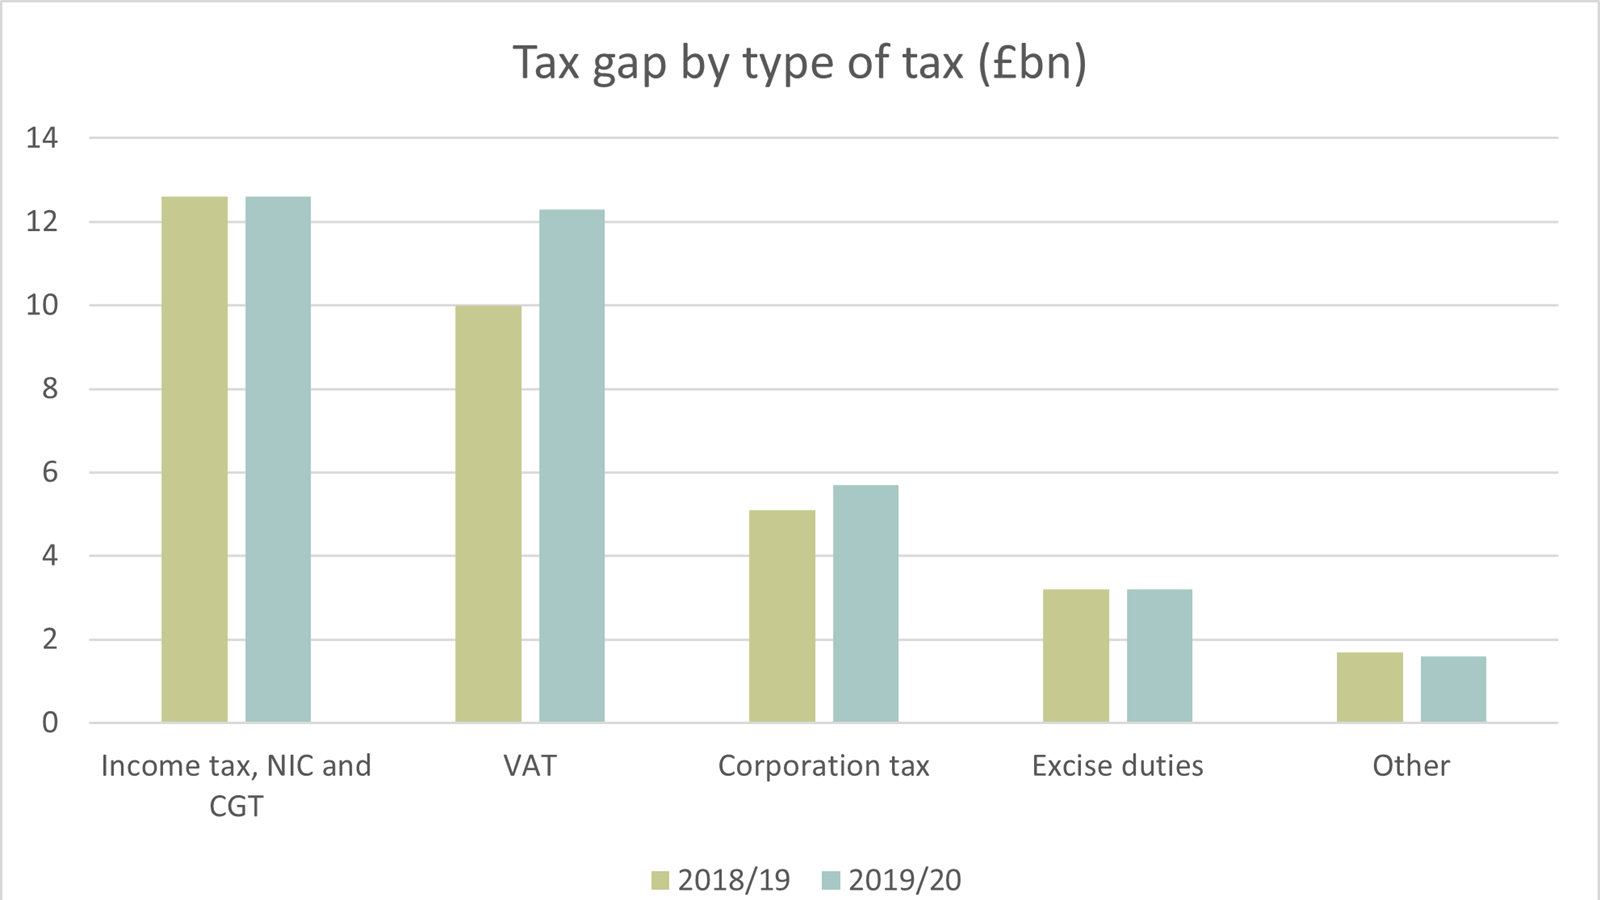 Table showing the tax gap for 2019/20 by type of tax according to HMRC data.